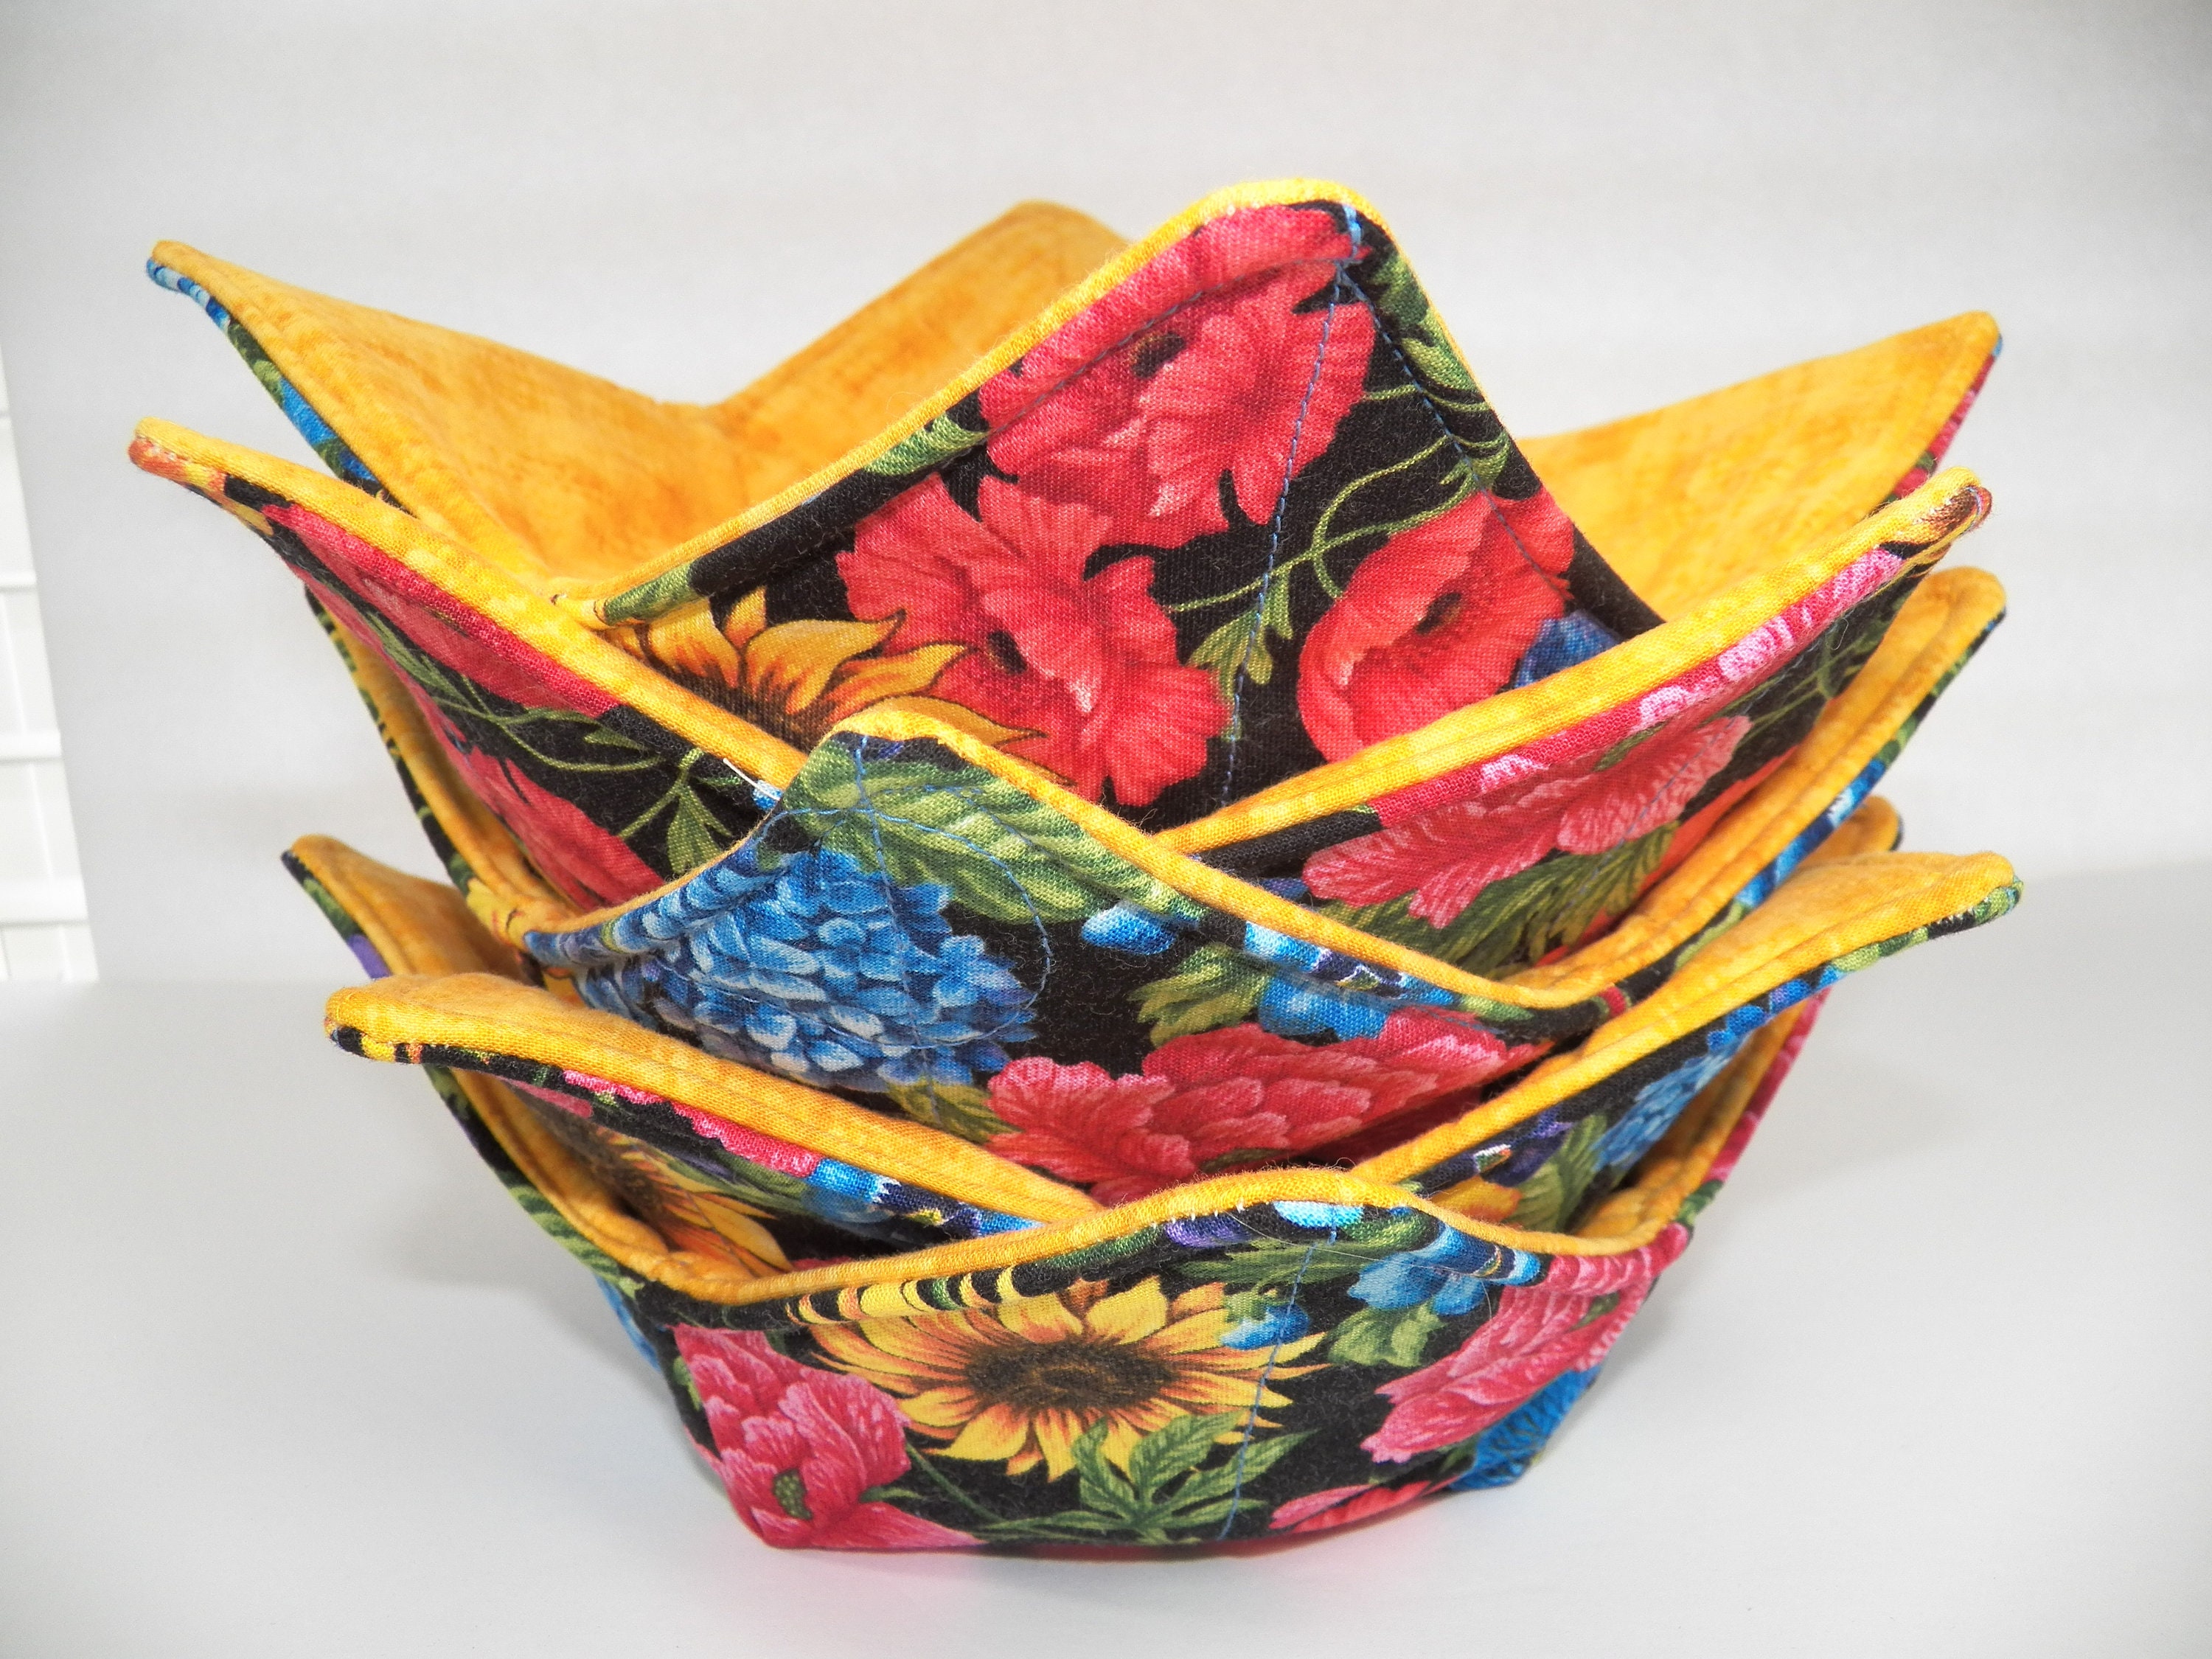 Quilted Bowl Cozy for microwave or ice cream 10 x 10 Green/Orange Floral  - Handy Caddy & Irresistible Leggings